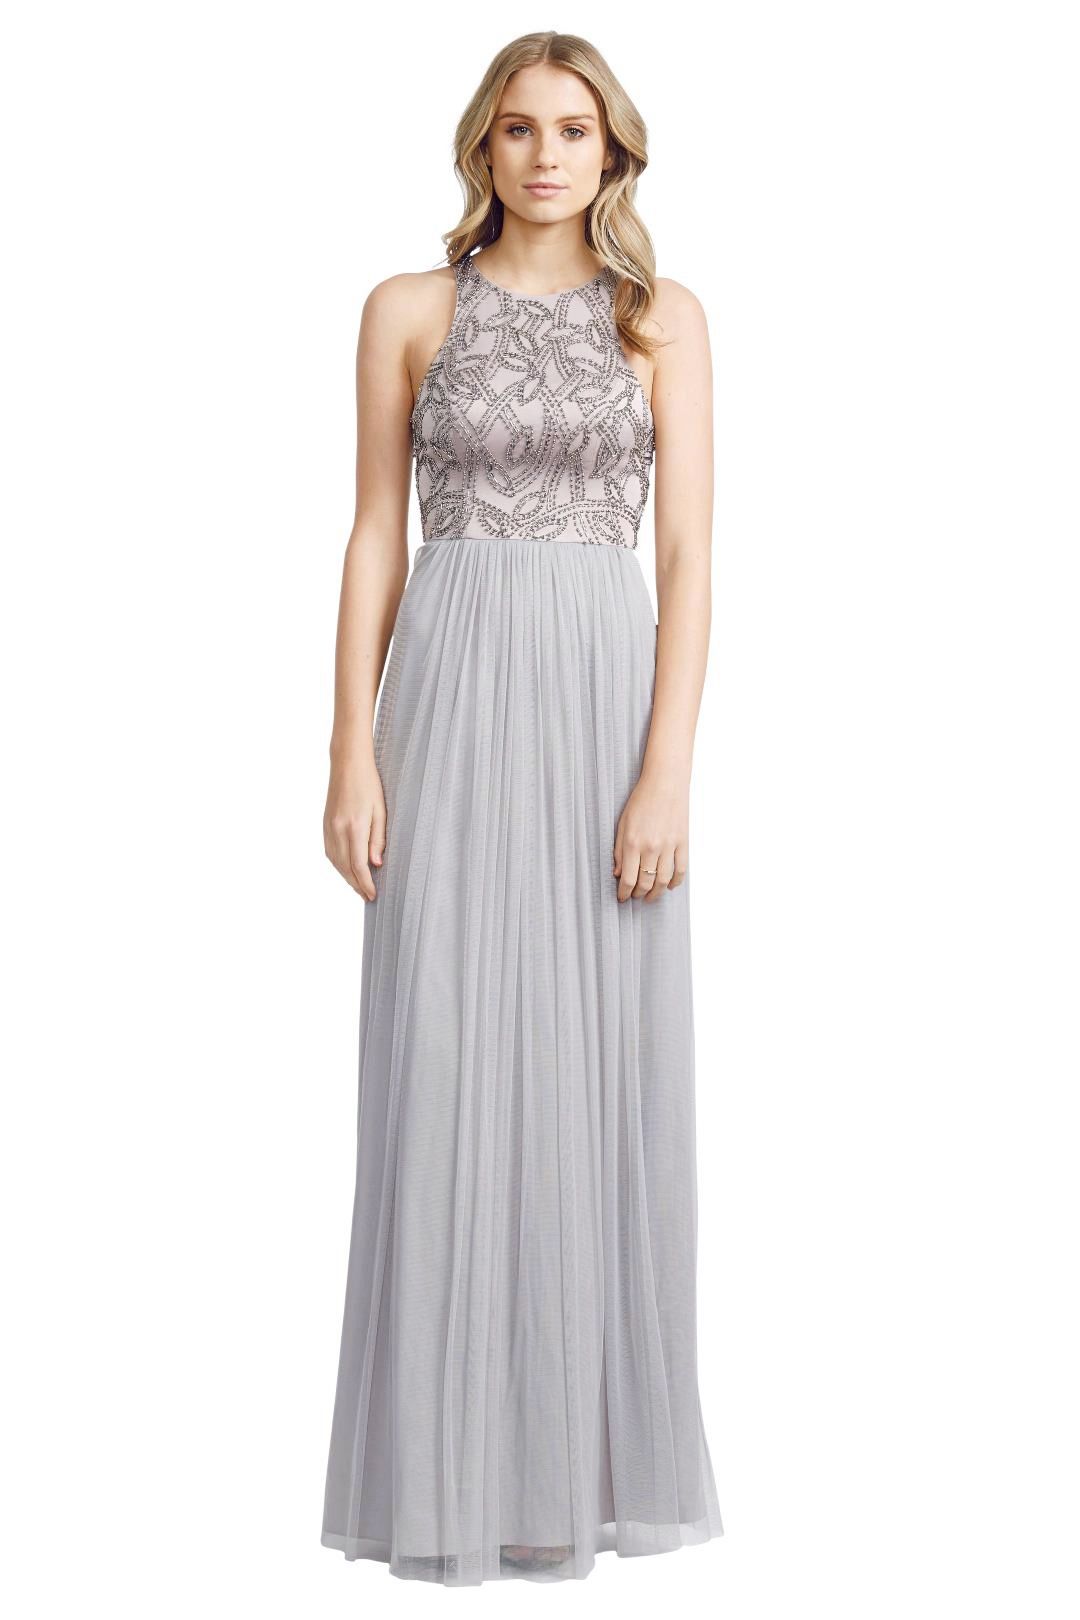 George - Sofia Gown - Grey - Front